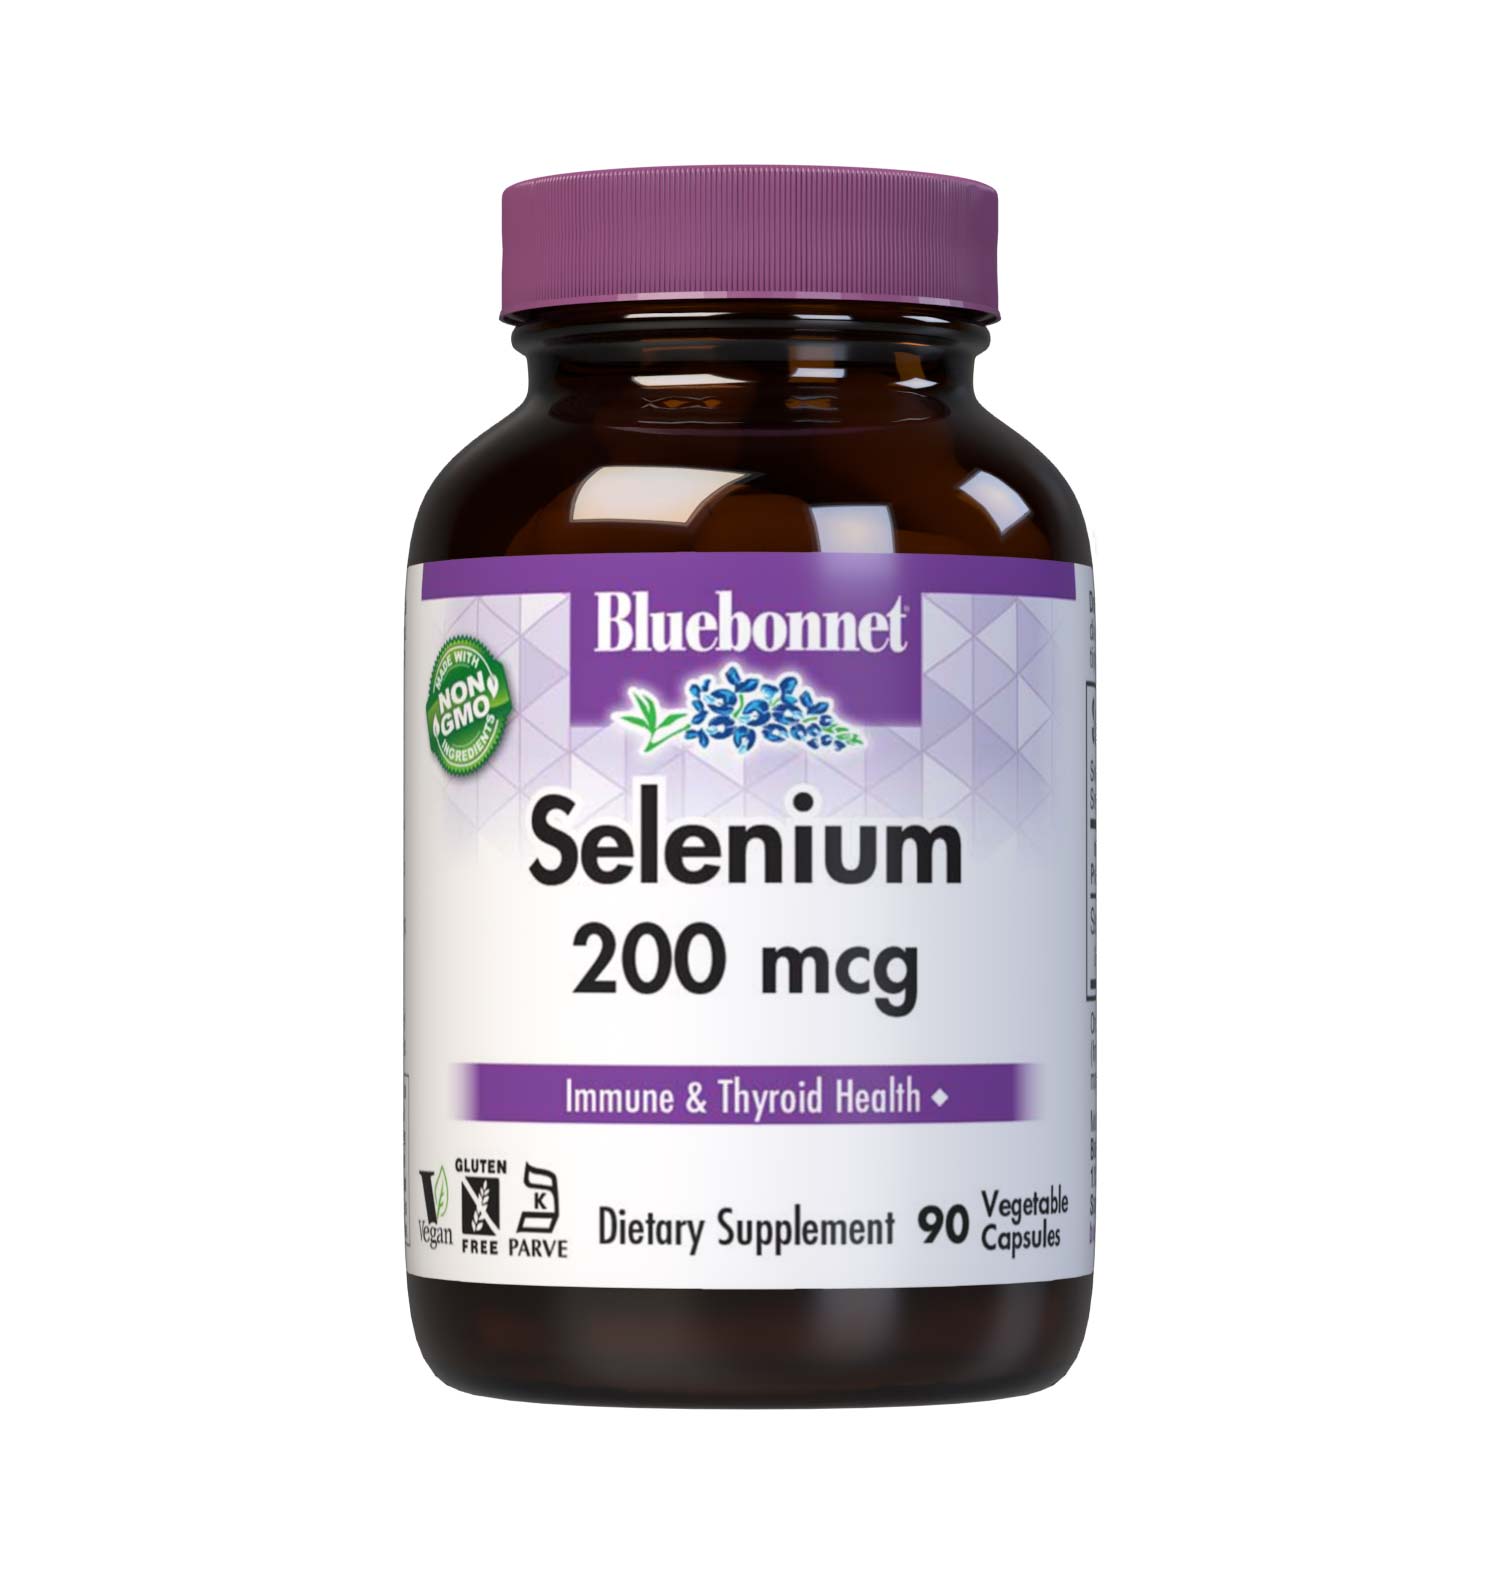 Bluebonnet's Selenium 200 mcg 90 Vegetable Capsules are formulated with selenomethionine, an amino acid chelate of selenium and L-methionine, which may support as immune and thyroid health. #size_90 count